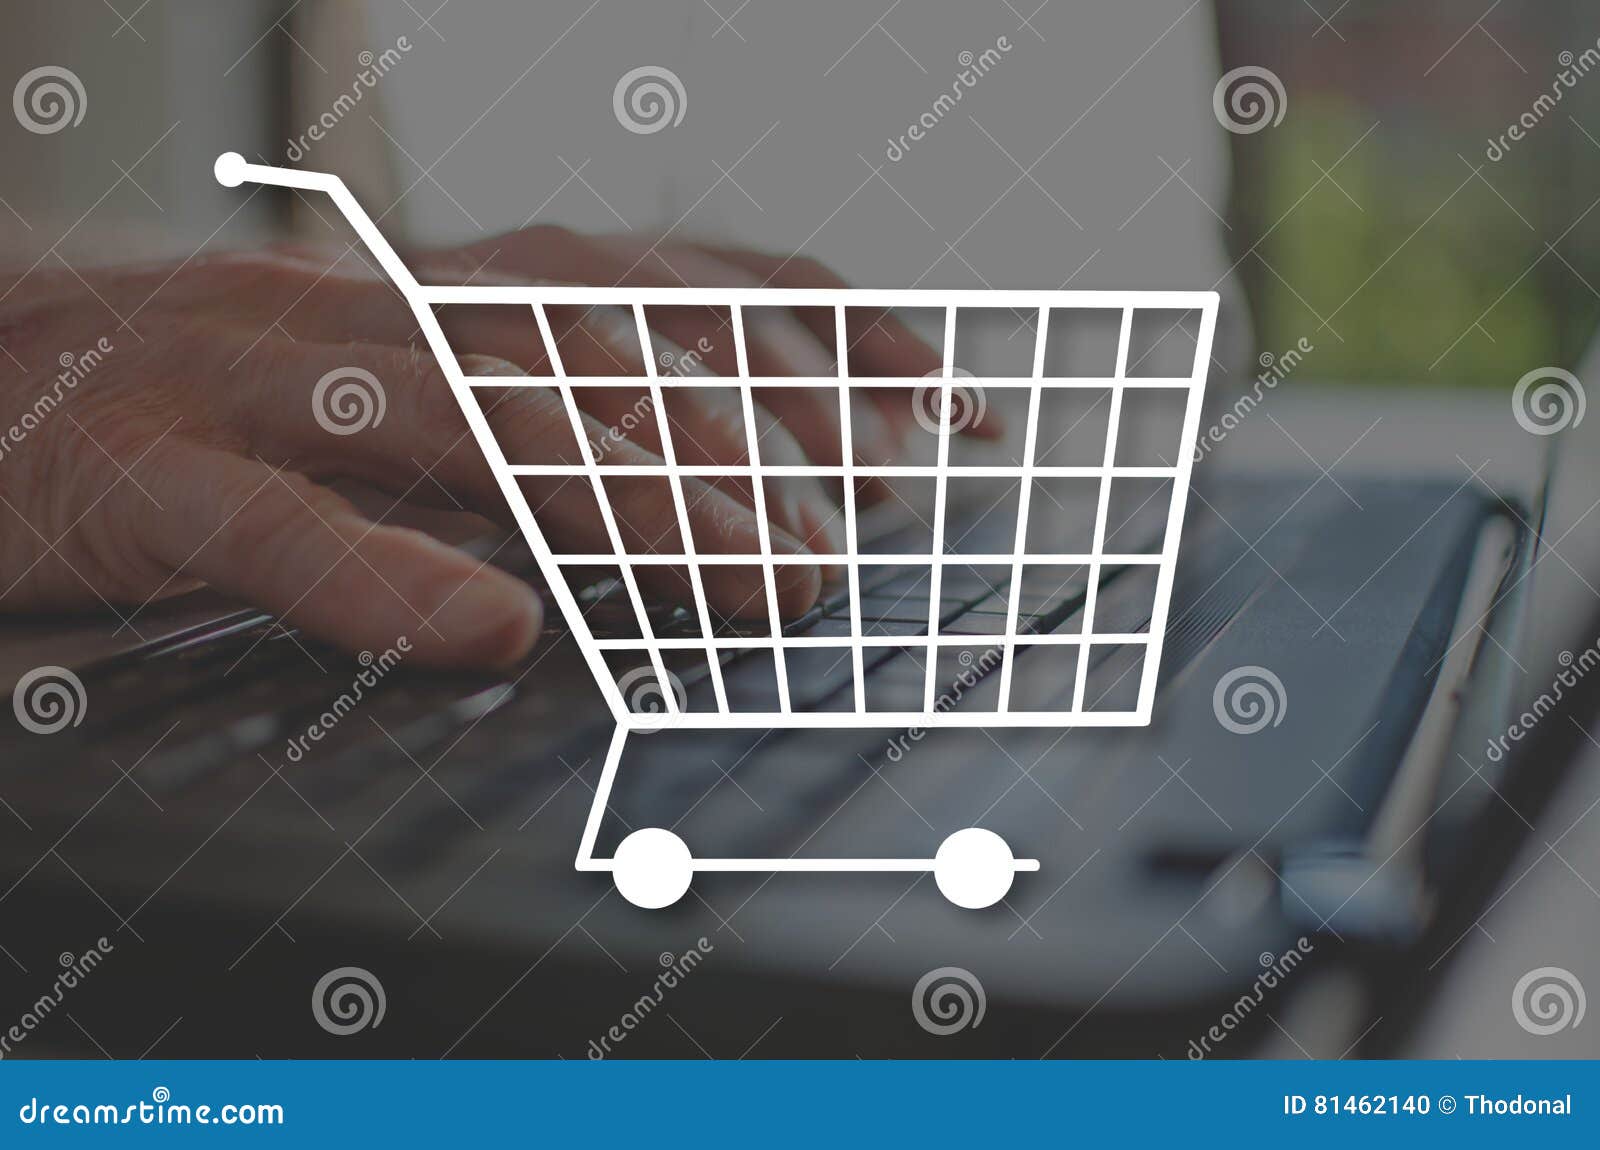 Concept of online shopping stock photo. Image of ecommerce - 81462140